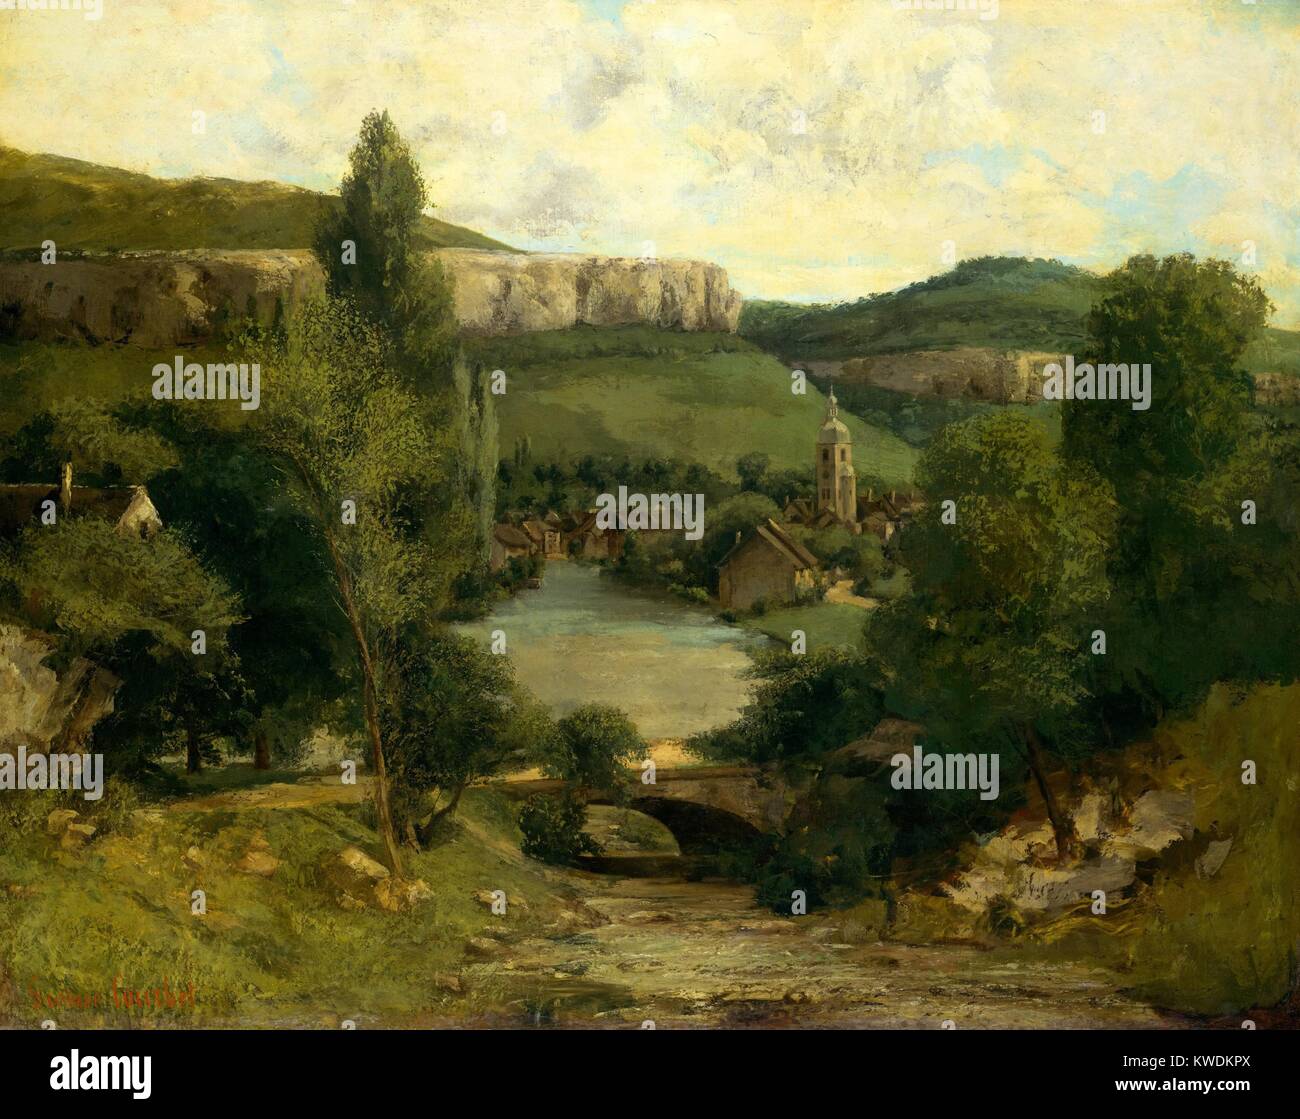 VIEW OF ORNANS, by Gustave Courbet, 1853-57, French painting, oil on canvas. View of the countryside of Courbets native town. The church steeple rises above houses along the banks of the River Loue, the cliff of Roche du Mont. (BSLOC 2017 9 114) Stock Photo